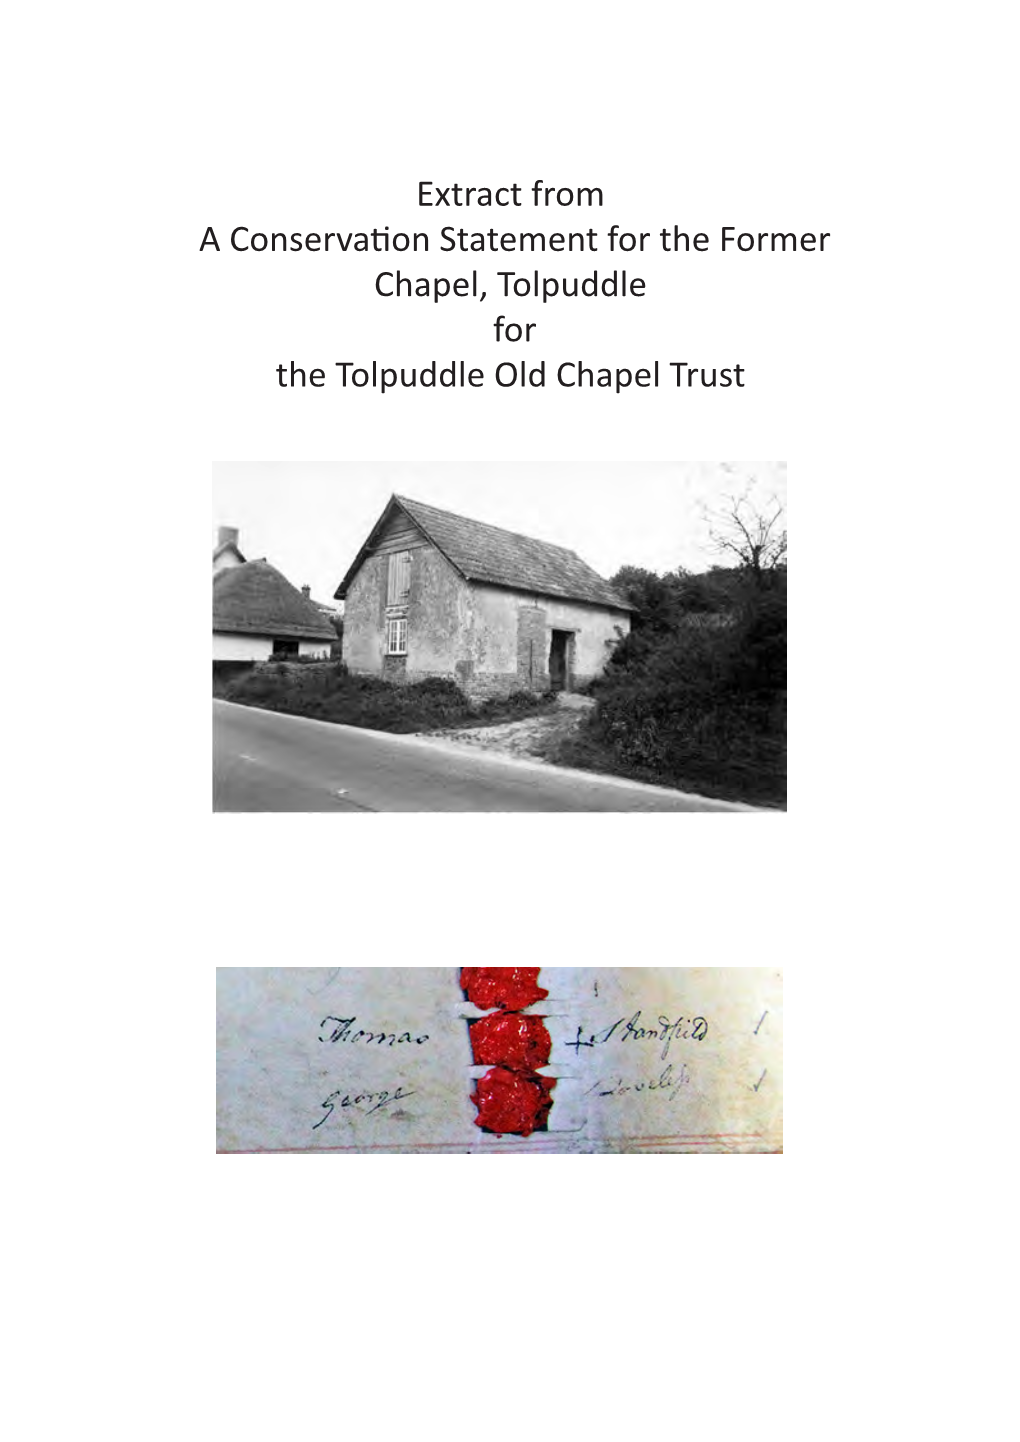 Extract from a Conservation Statement for the Former Chapel, Tolpuddle for the Tolpuddle Old Chapel Trust Contents